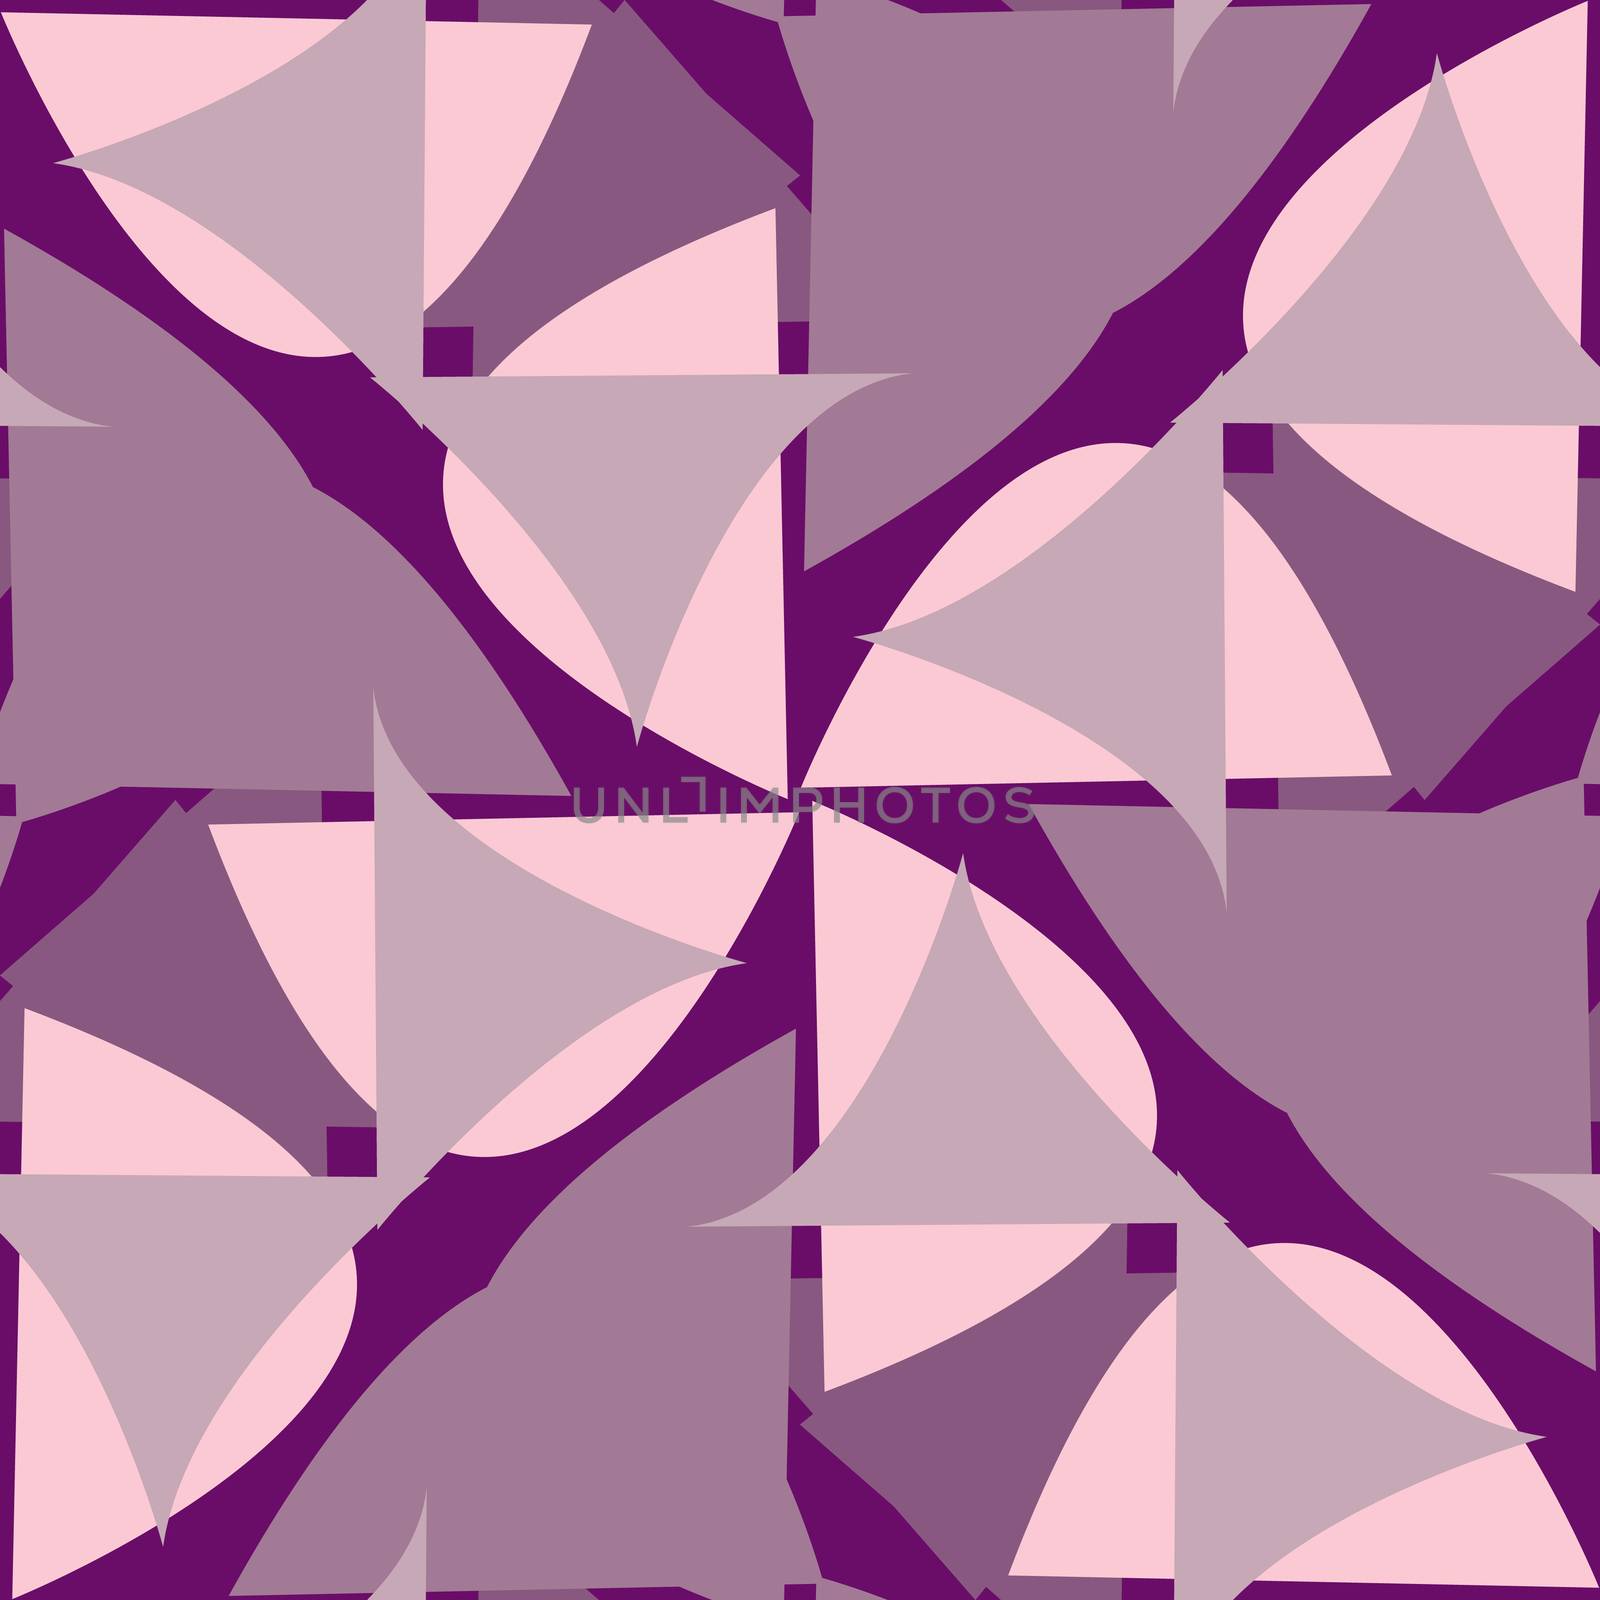 Abstract repeating background pattern of purple triangular shapes